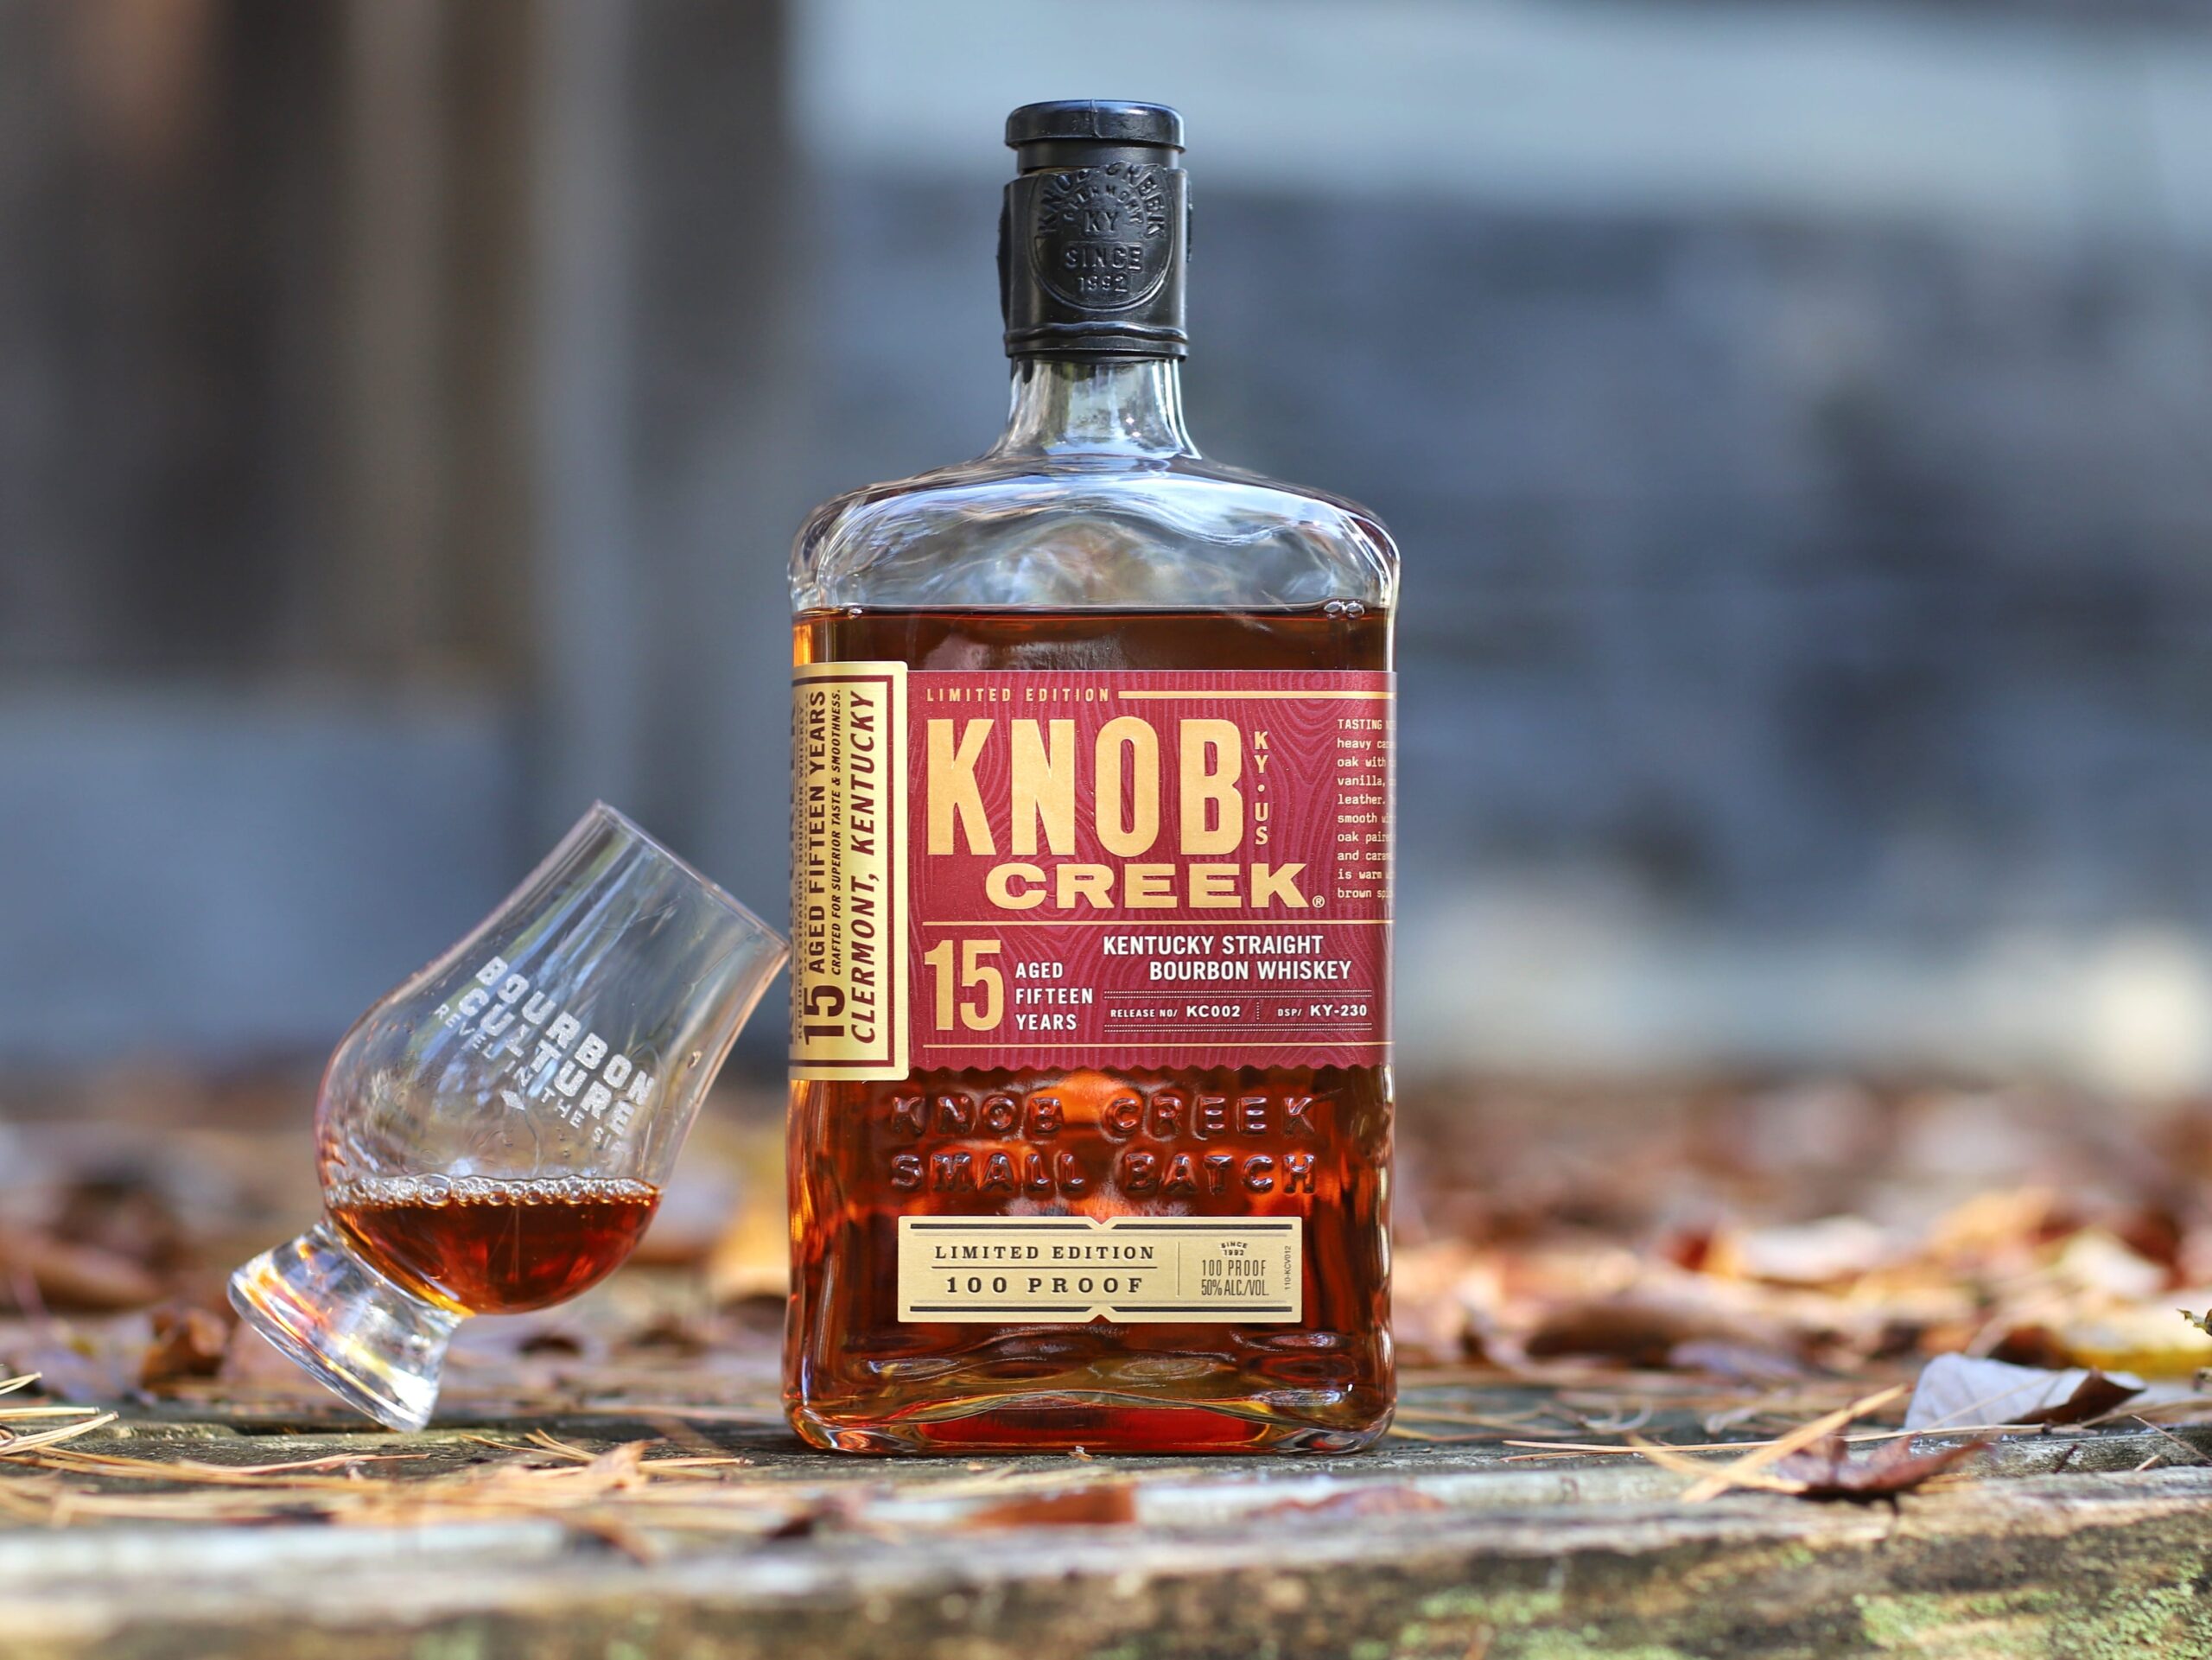 Knob Creek Limited Edition 15 Year Old Bourbon Review